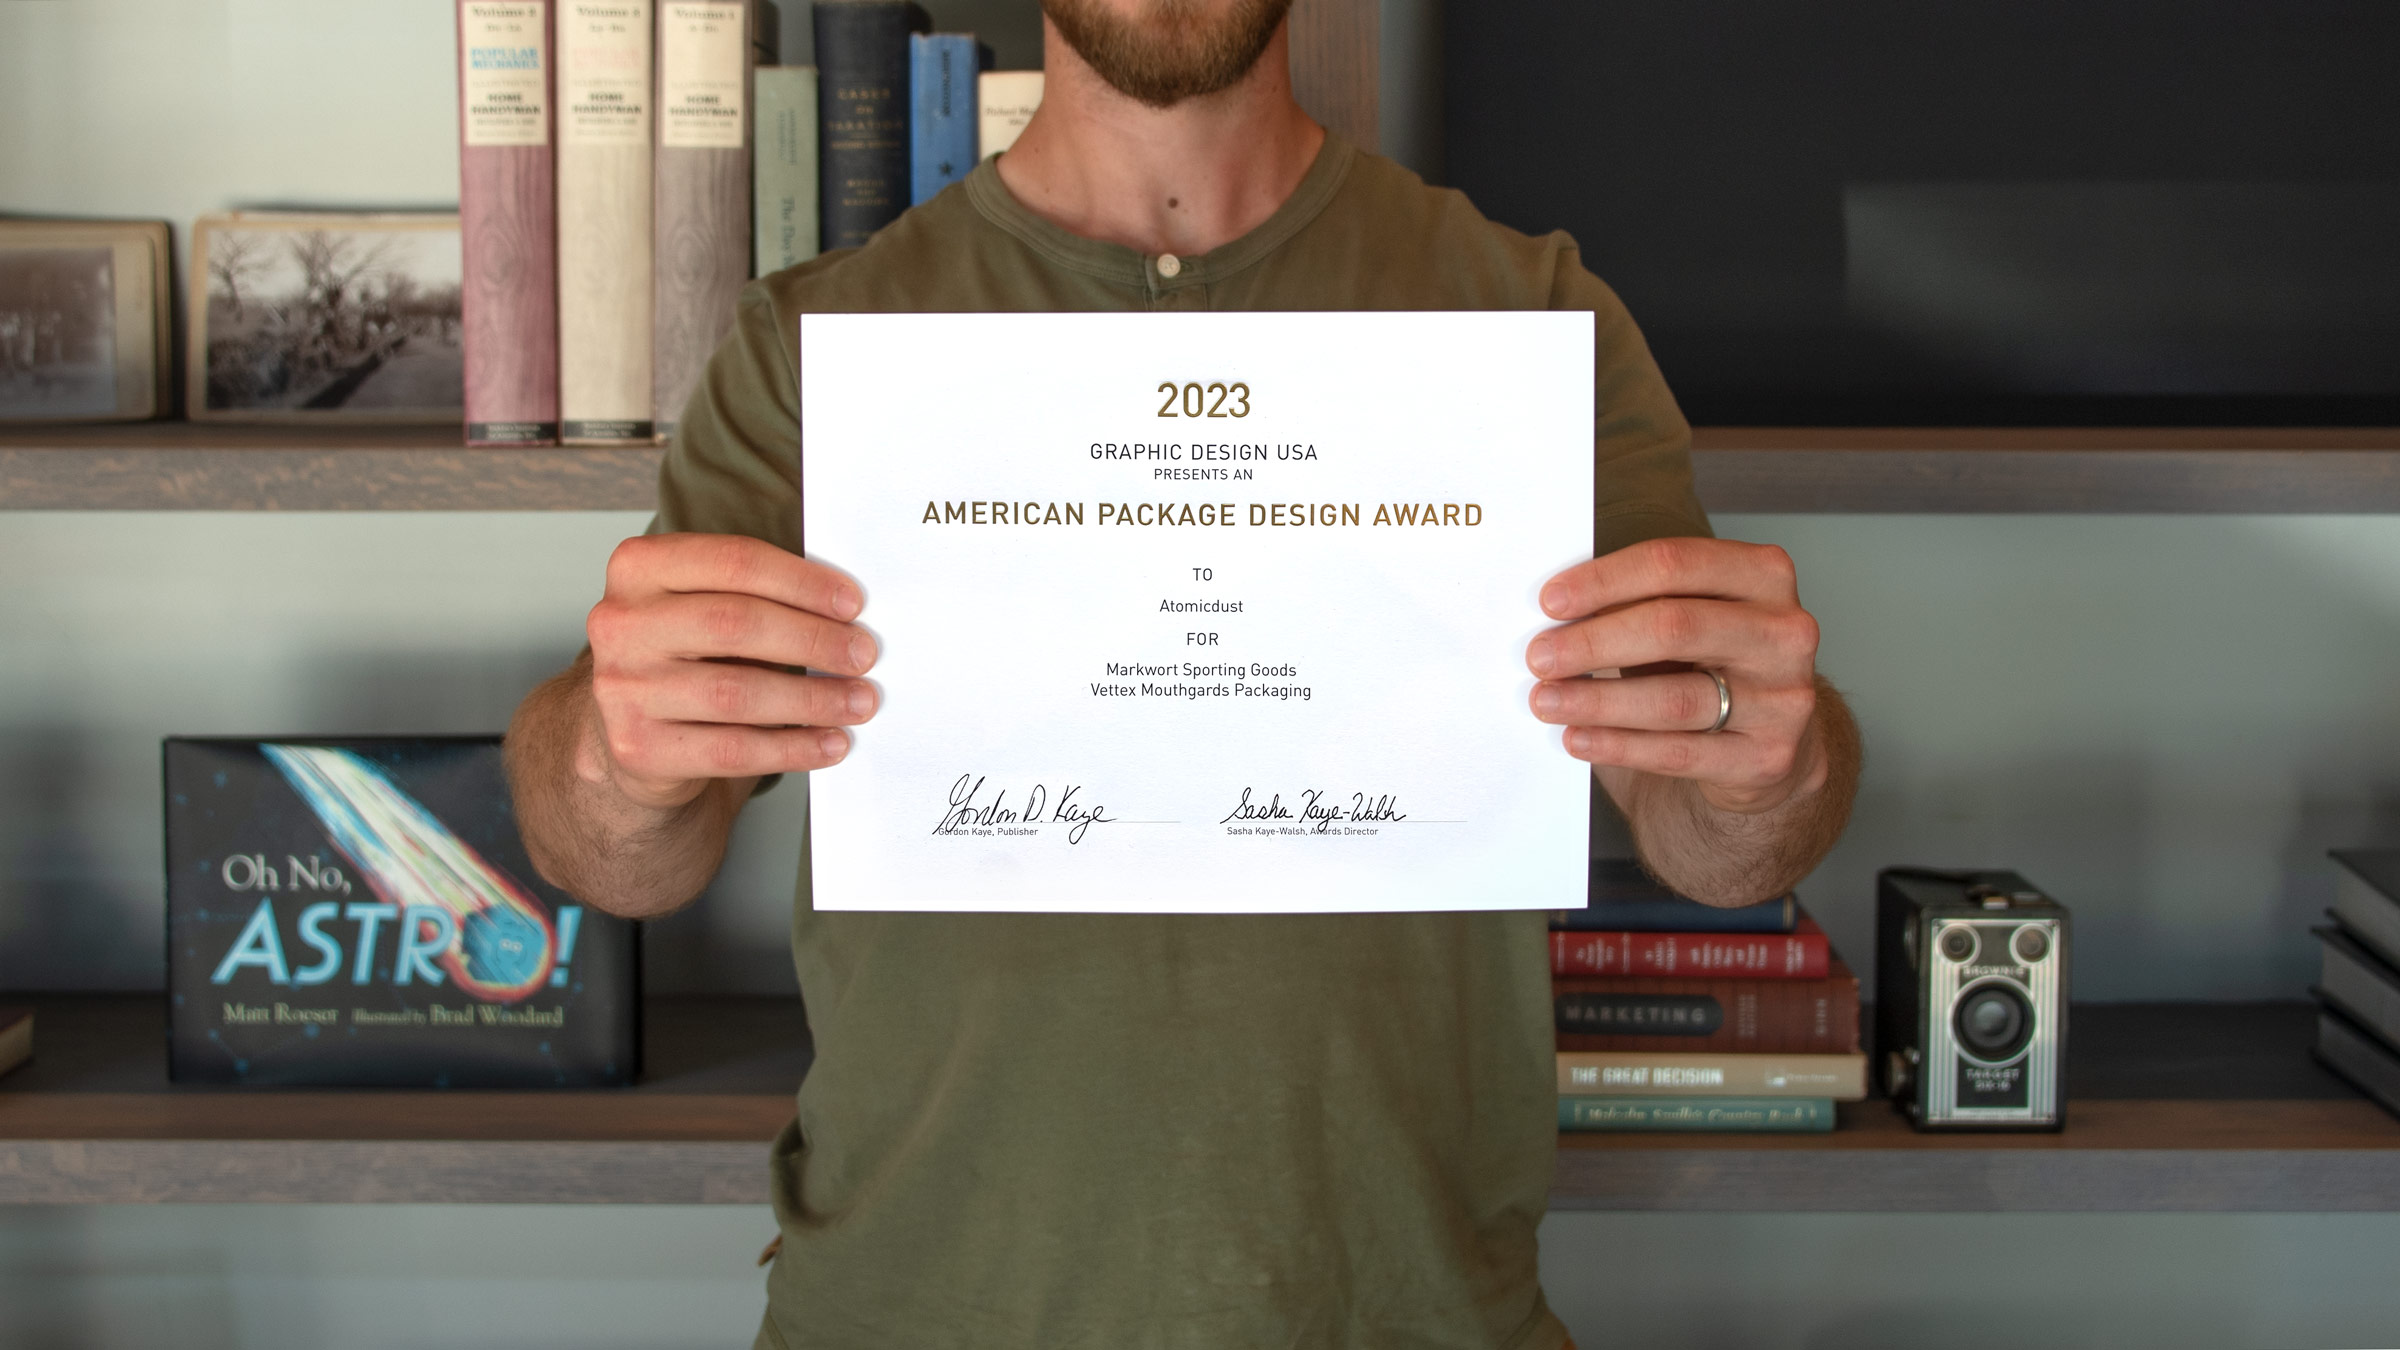 2023 Graphic Design USA American Package Design Award certificate